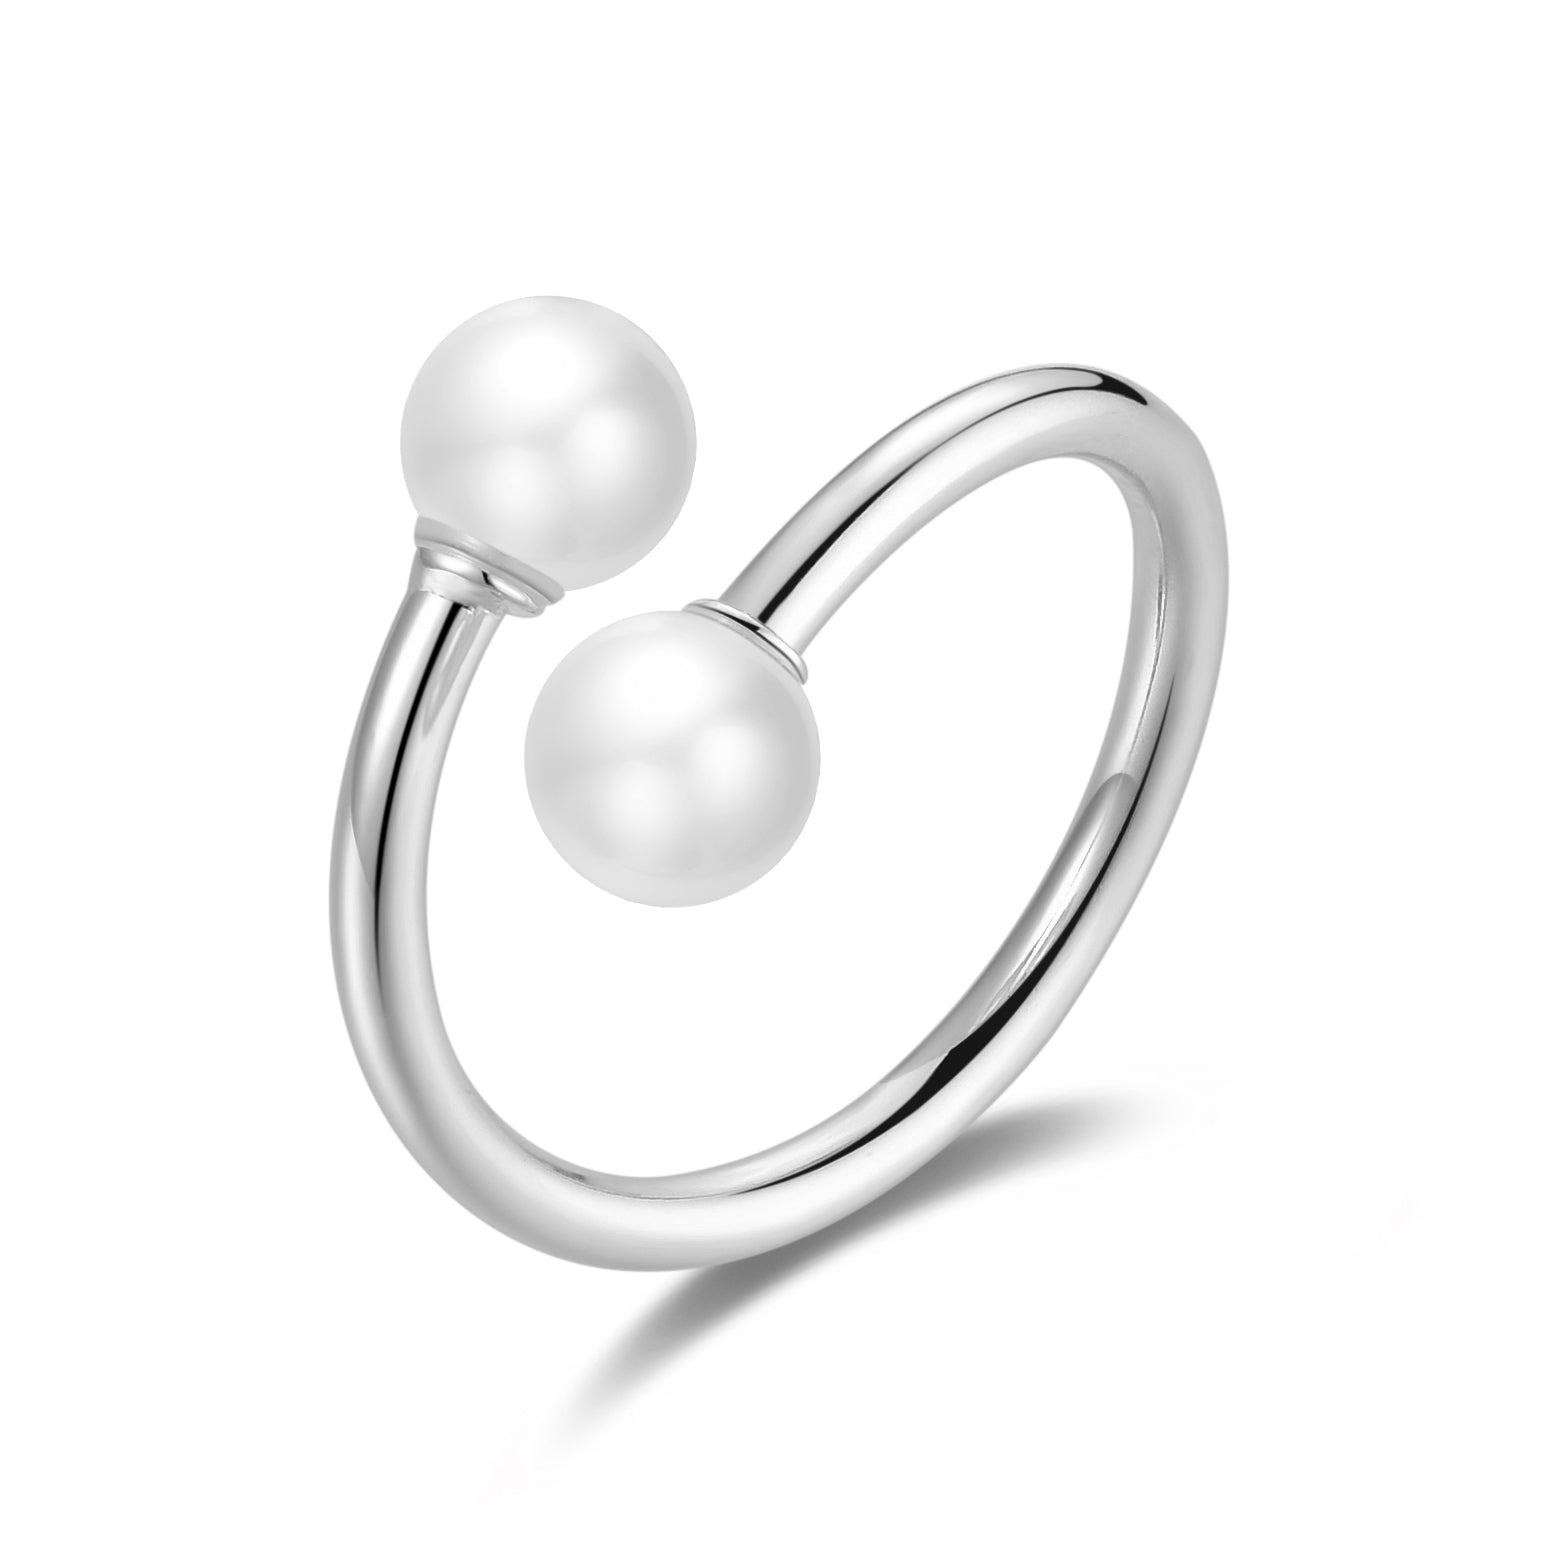 Silver Plated Adjustable Double Pearl Ring by Philip Jones Jewellery